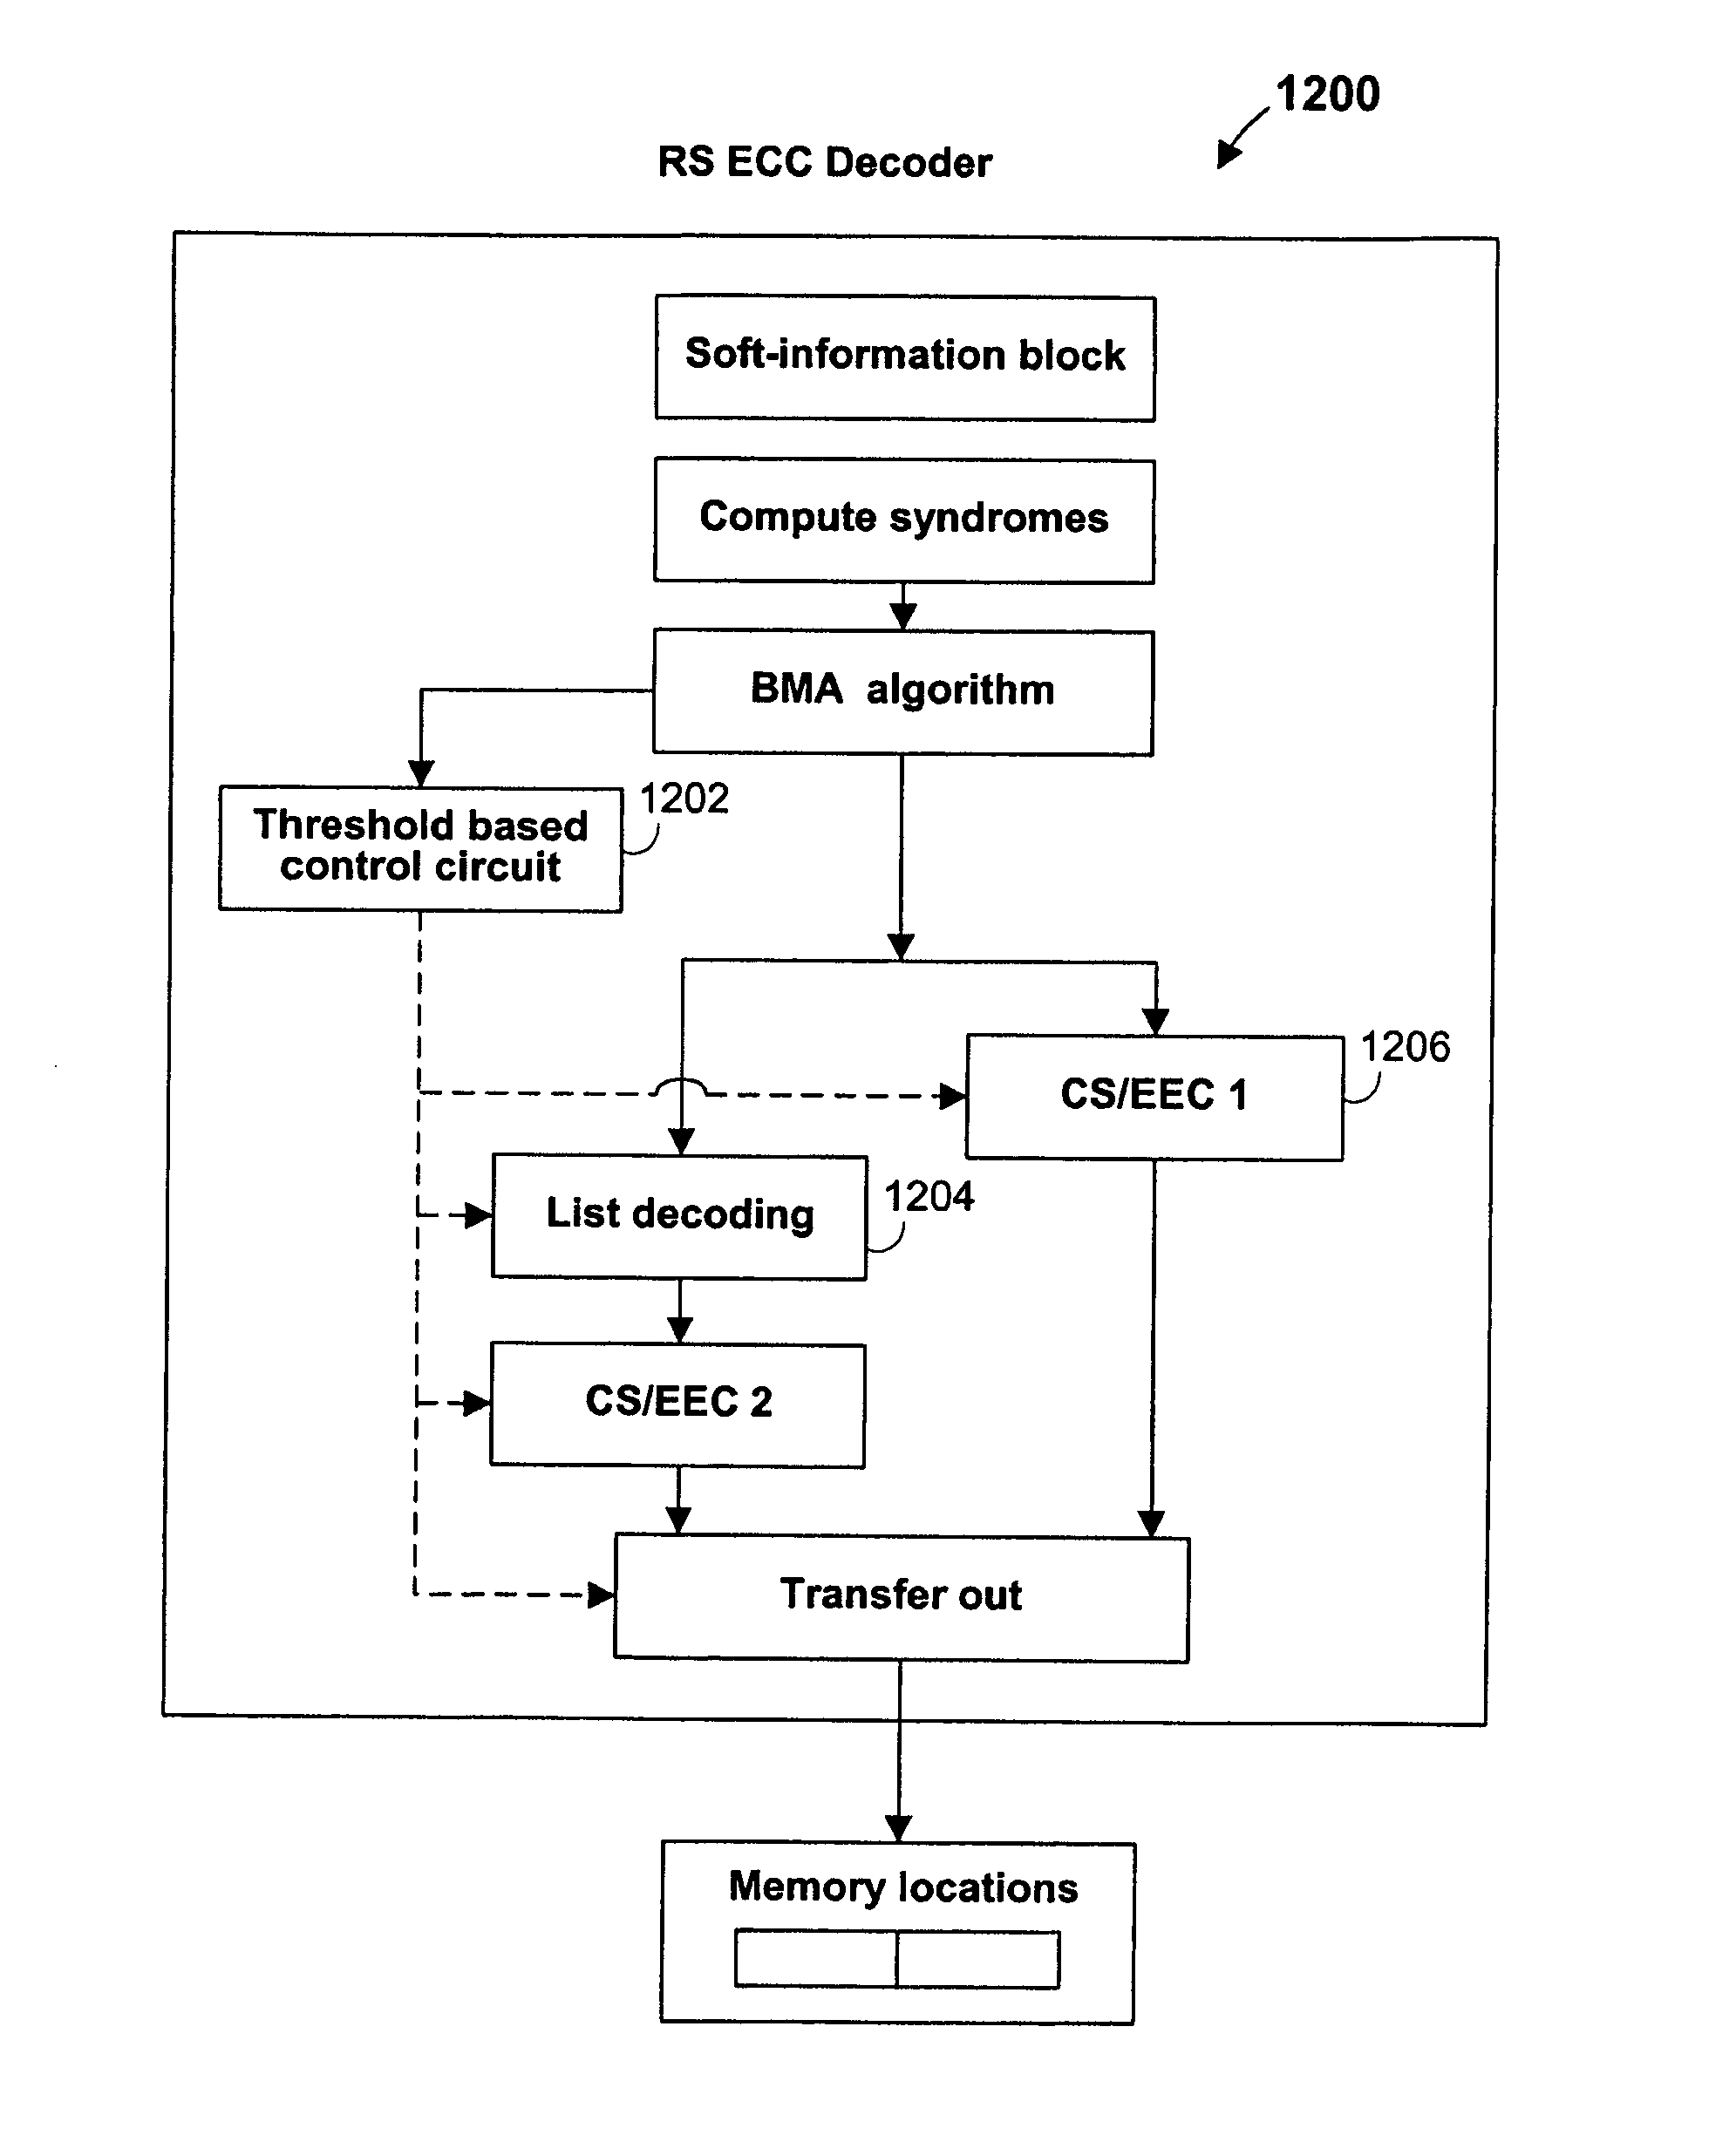 Architecture and control of reed-solomon error-correction decoding